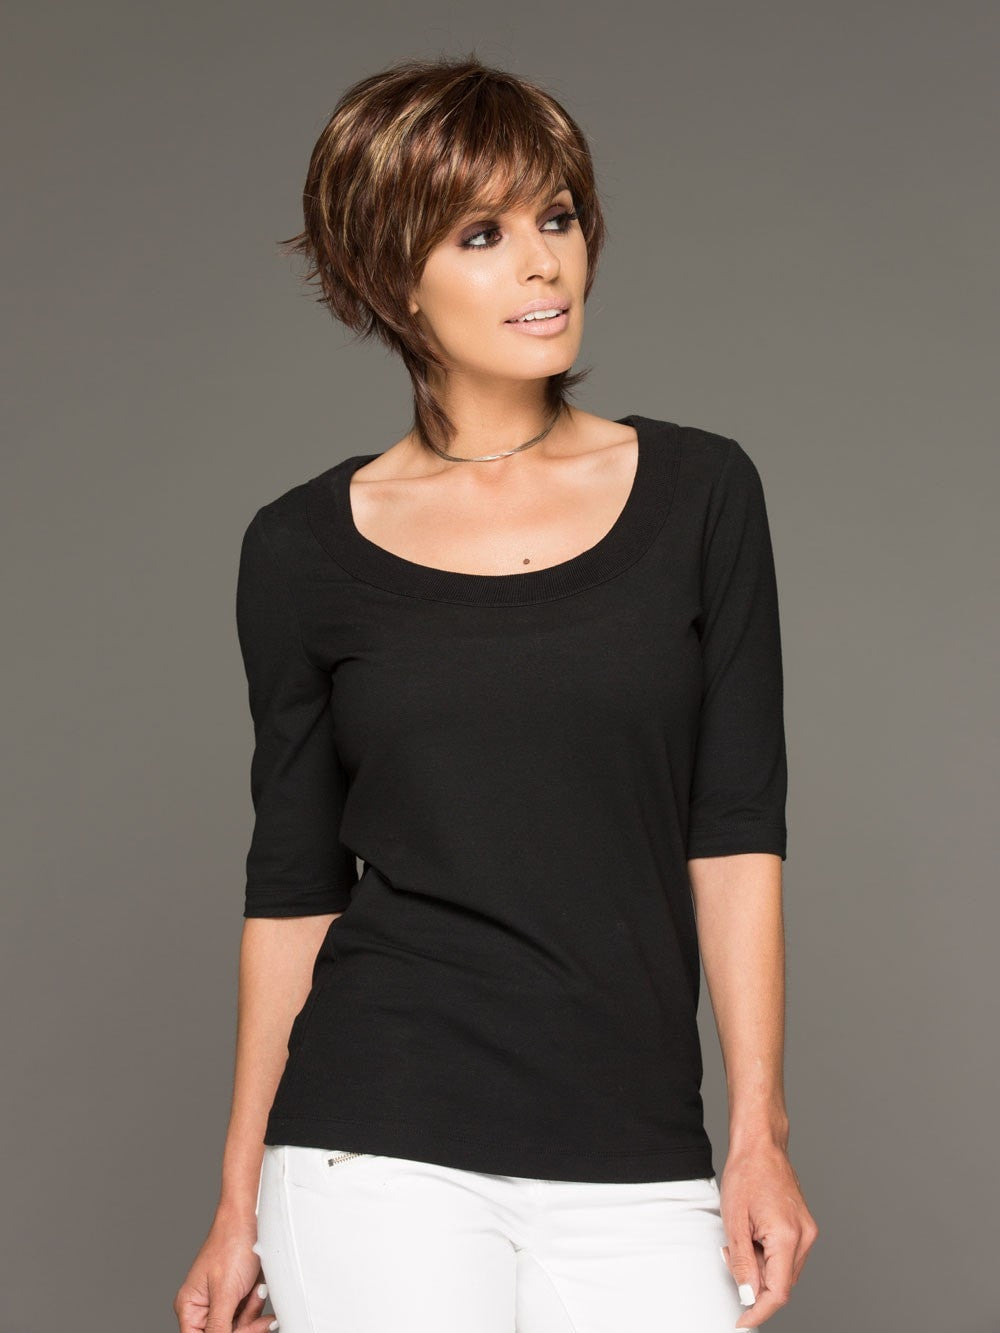 Noriko Millie is a short shag wig, a great cut that has been tailored for today's modern women. The precision cut and face framing fringe create a stunning silhouette